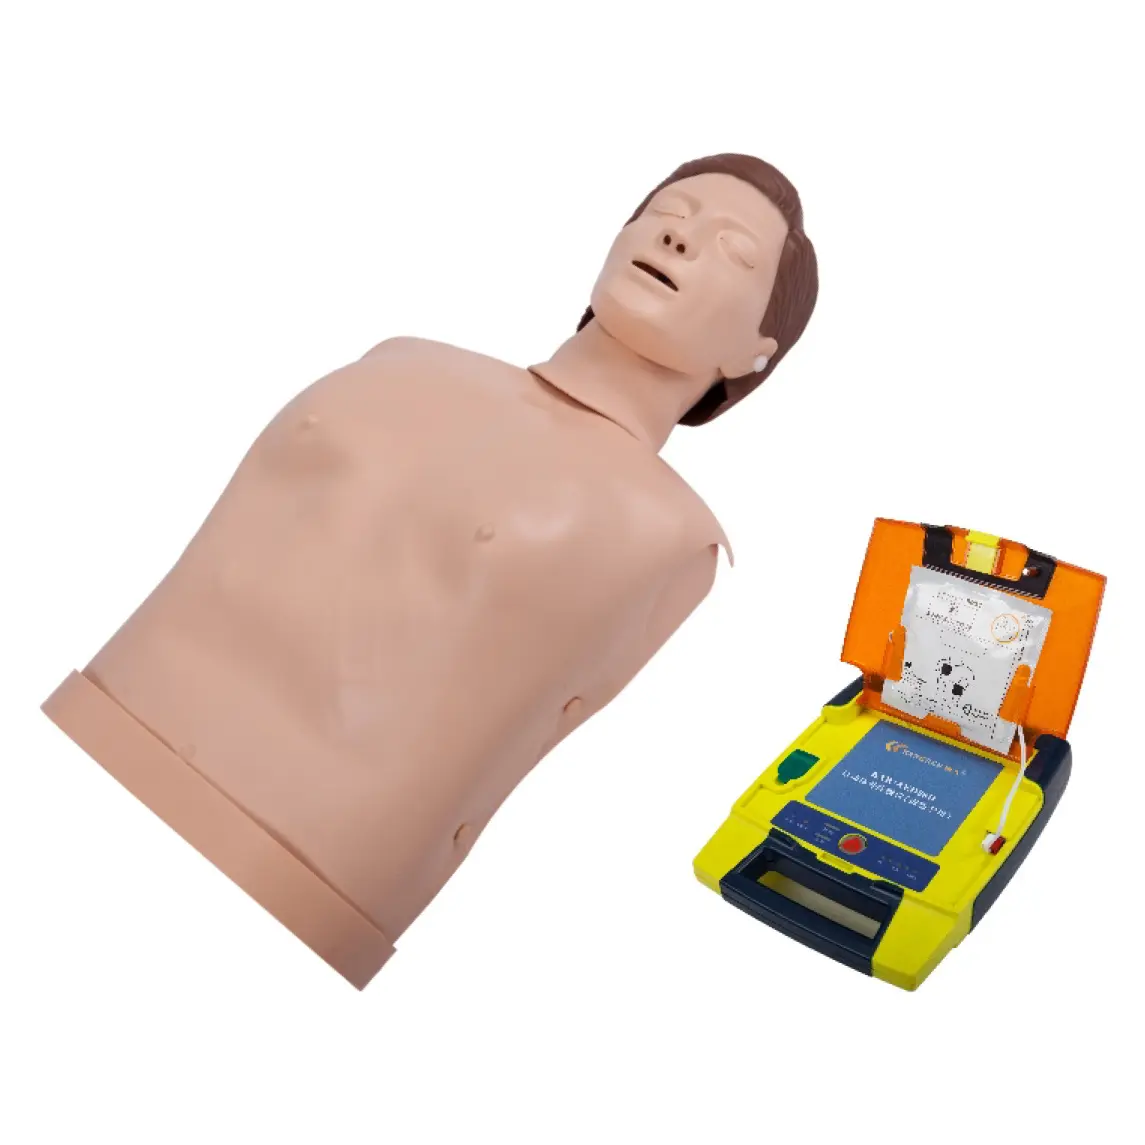 Automated External Defibrillator With Half Body CPR Training Combination Models